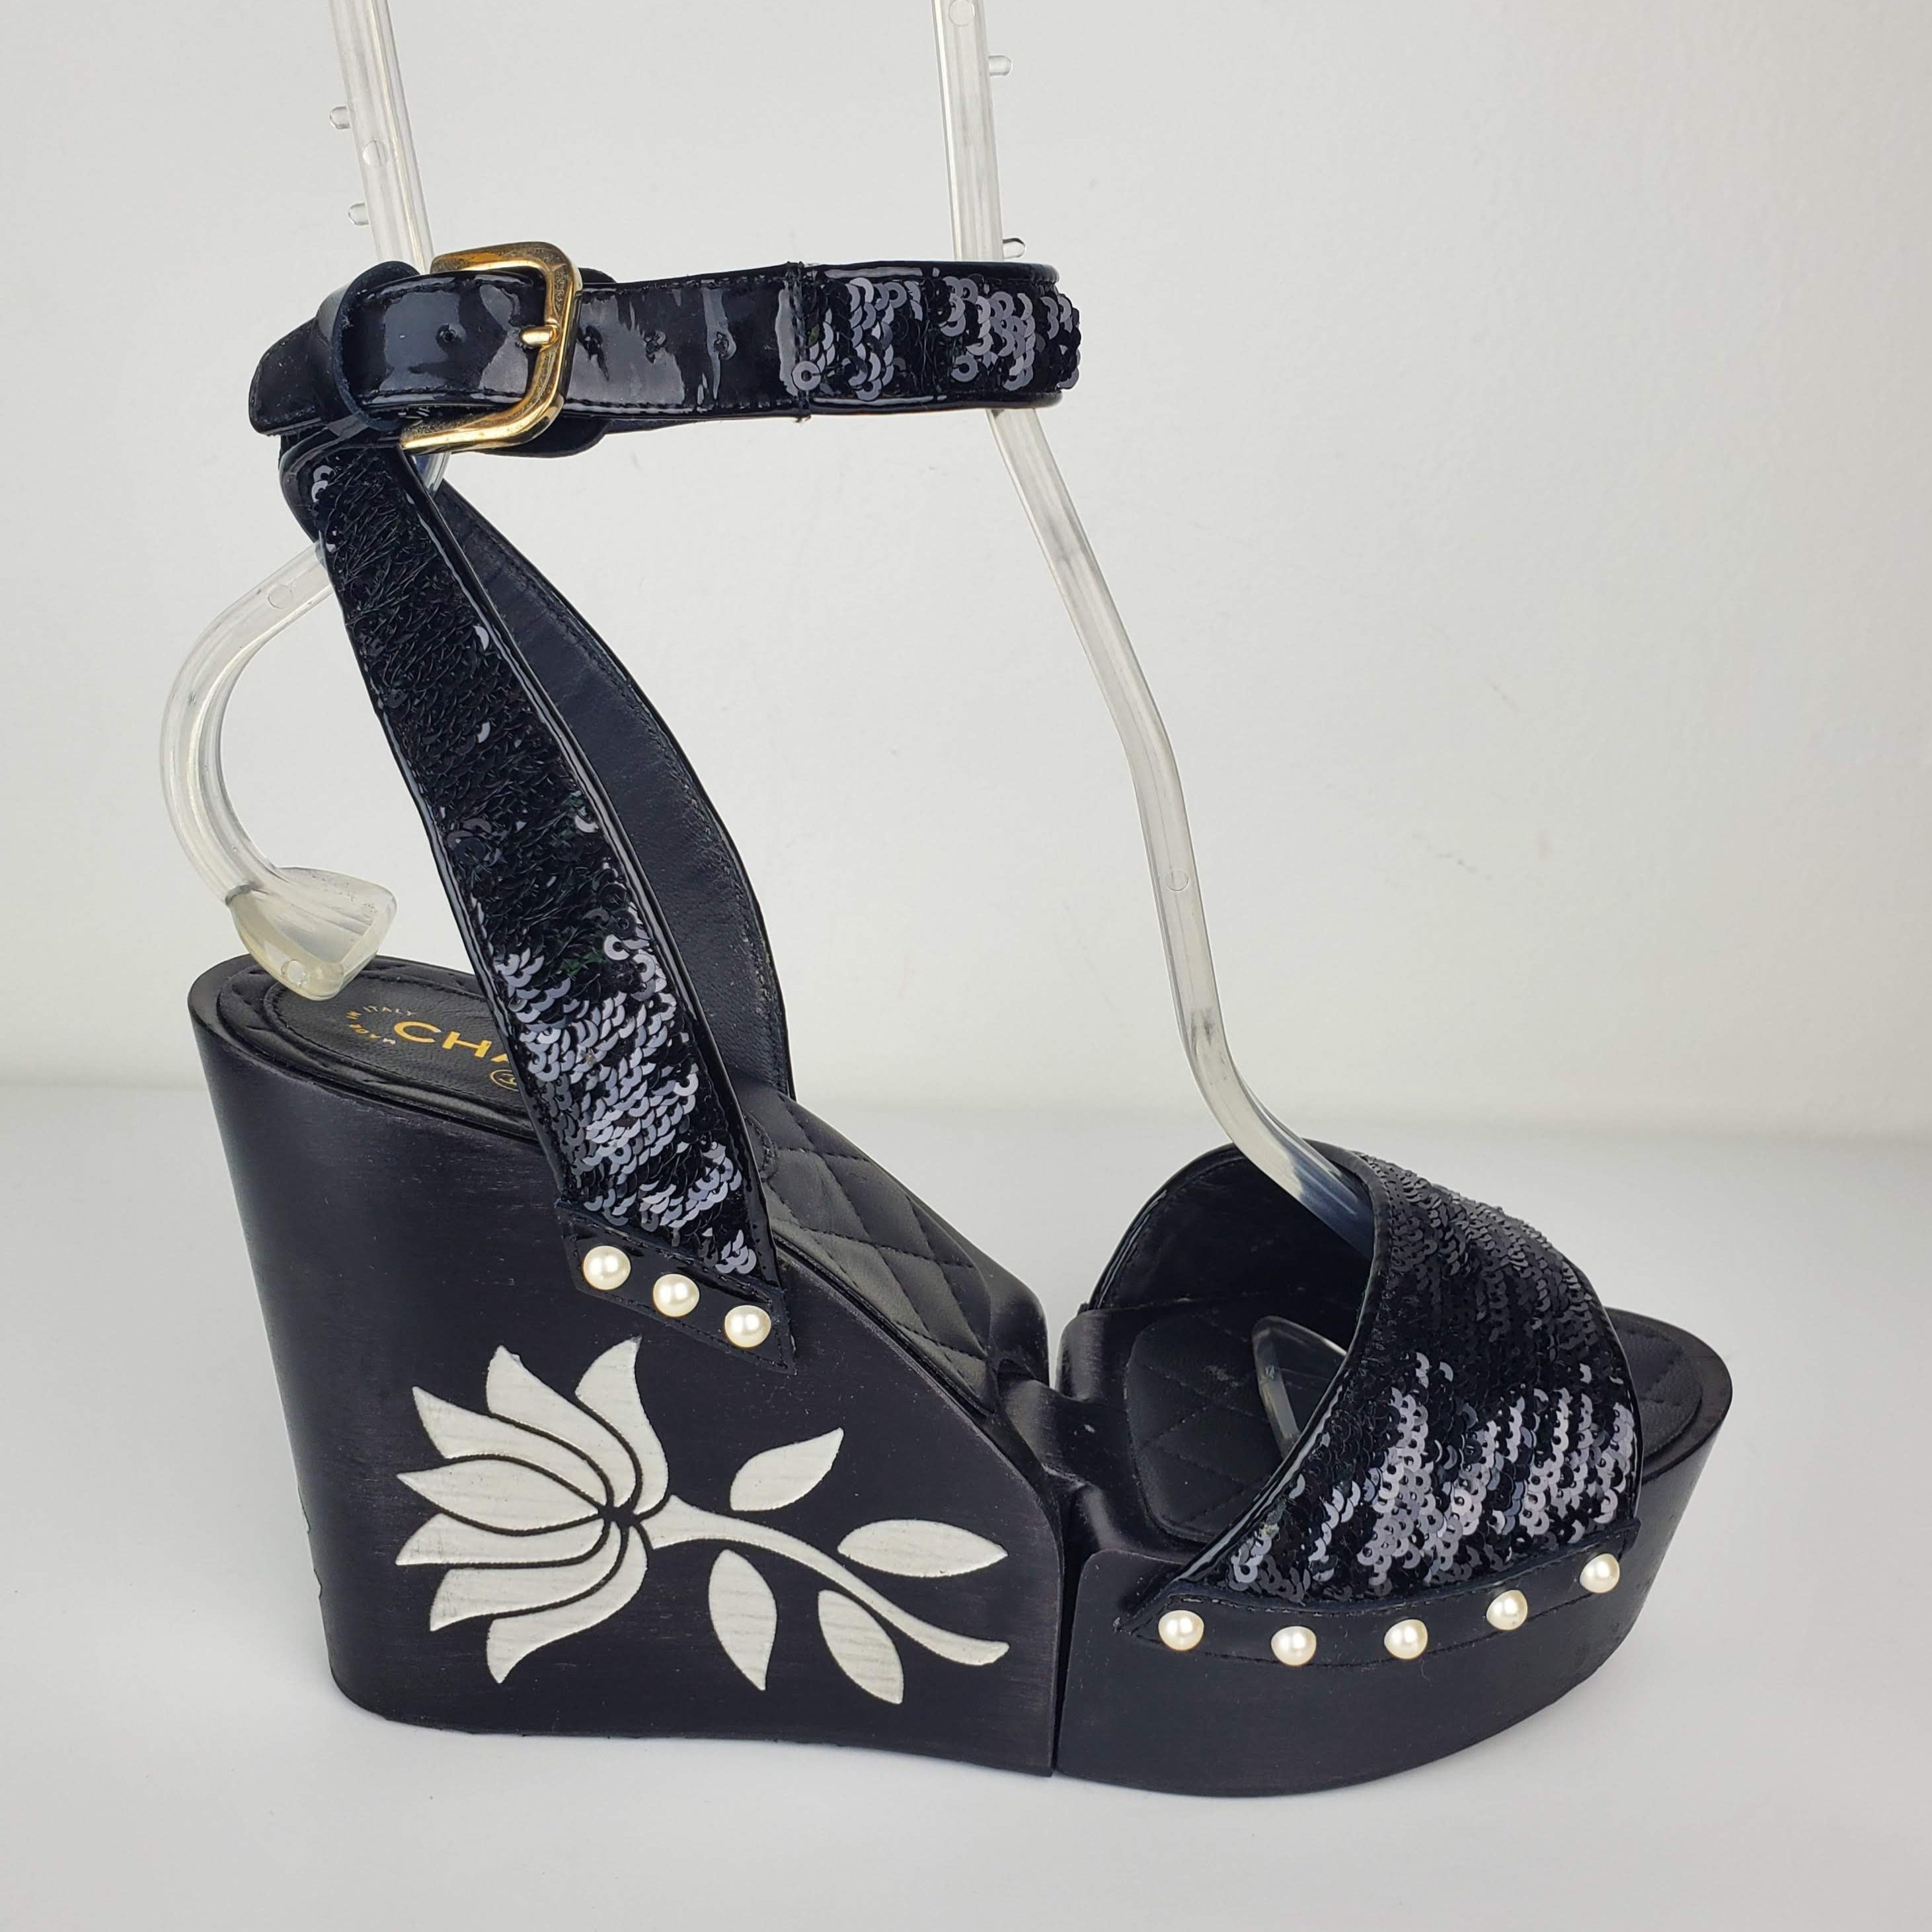 black chanel wedge shoes